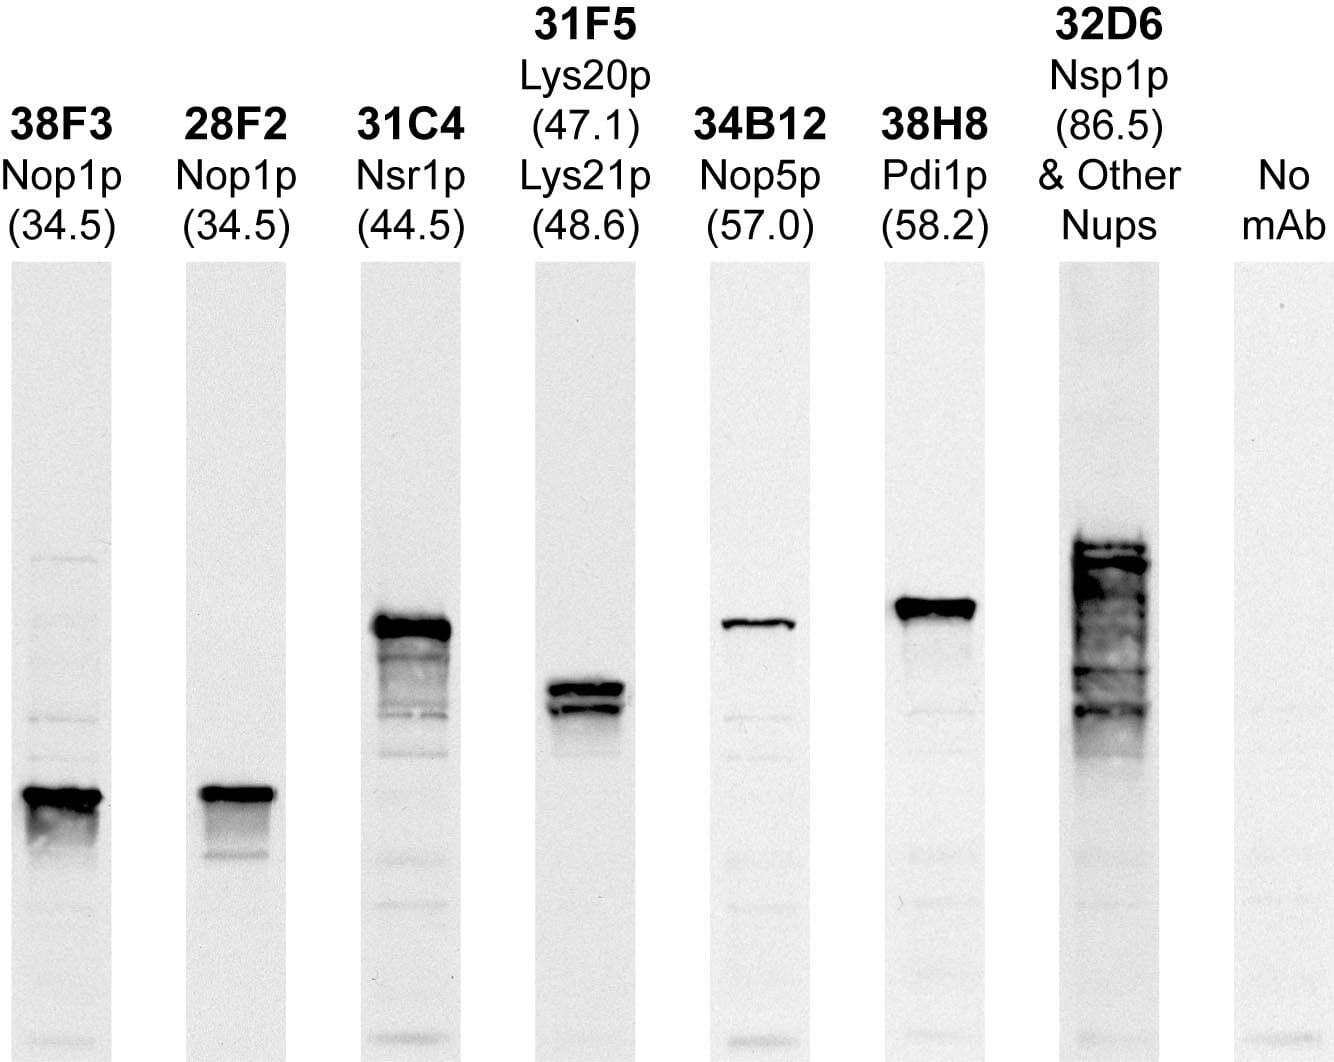 Western blots of whole yeast protein extracts with a collection of our antibodies. The blot for Anti-Pdi1p Antibody is in the indicated lane and the number indicates the SDS-PAGE molecular weight in kDas.